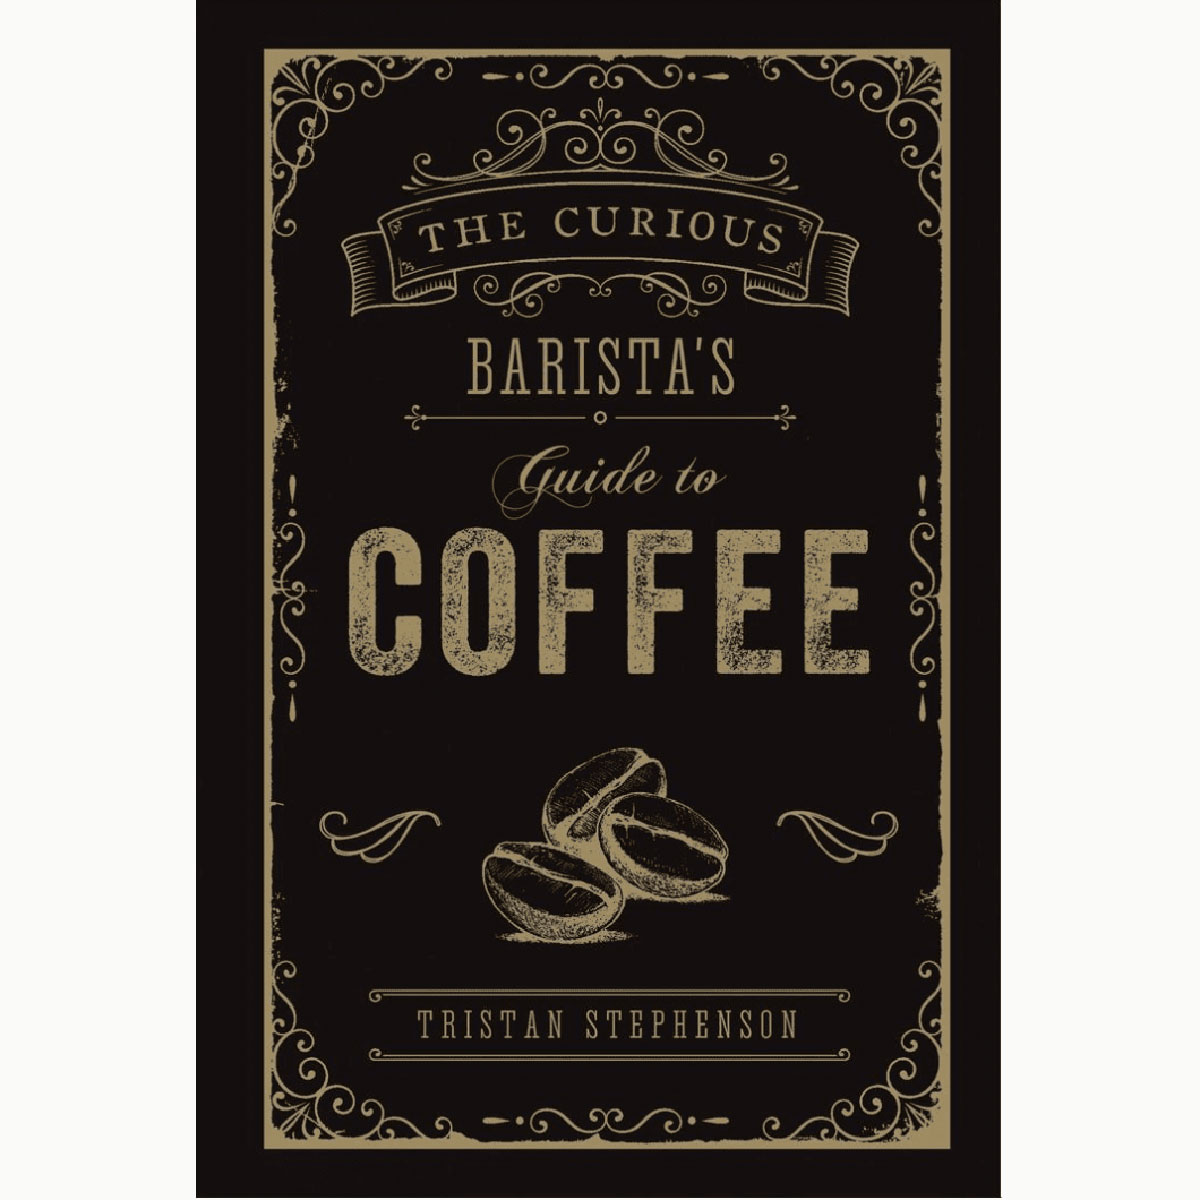 Barista's Guide to Coffee